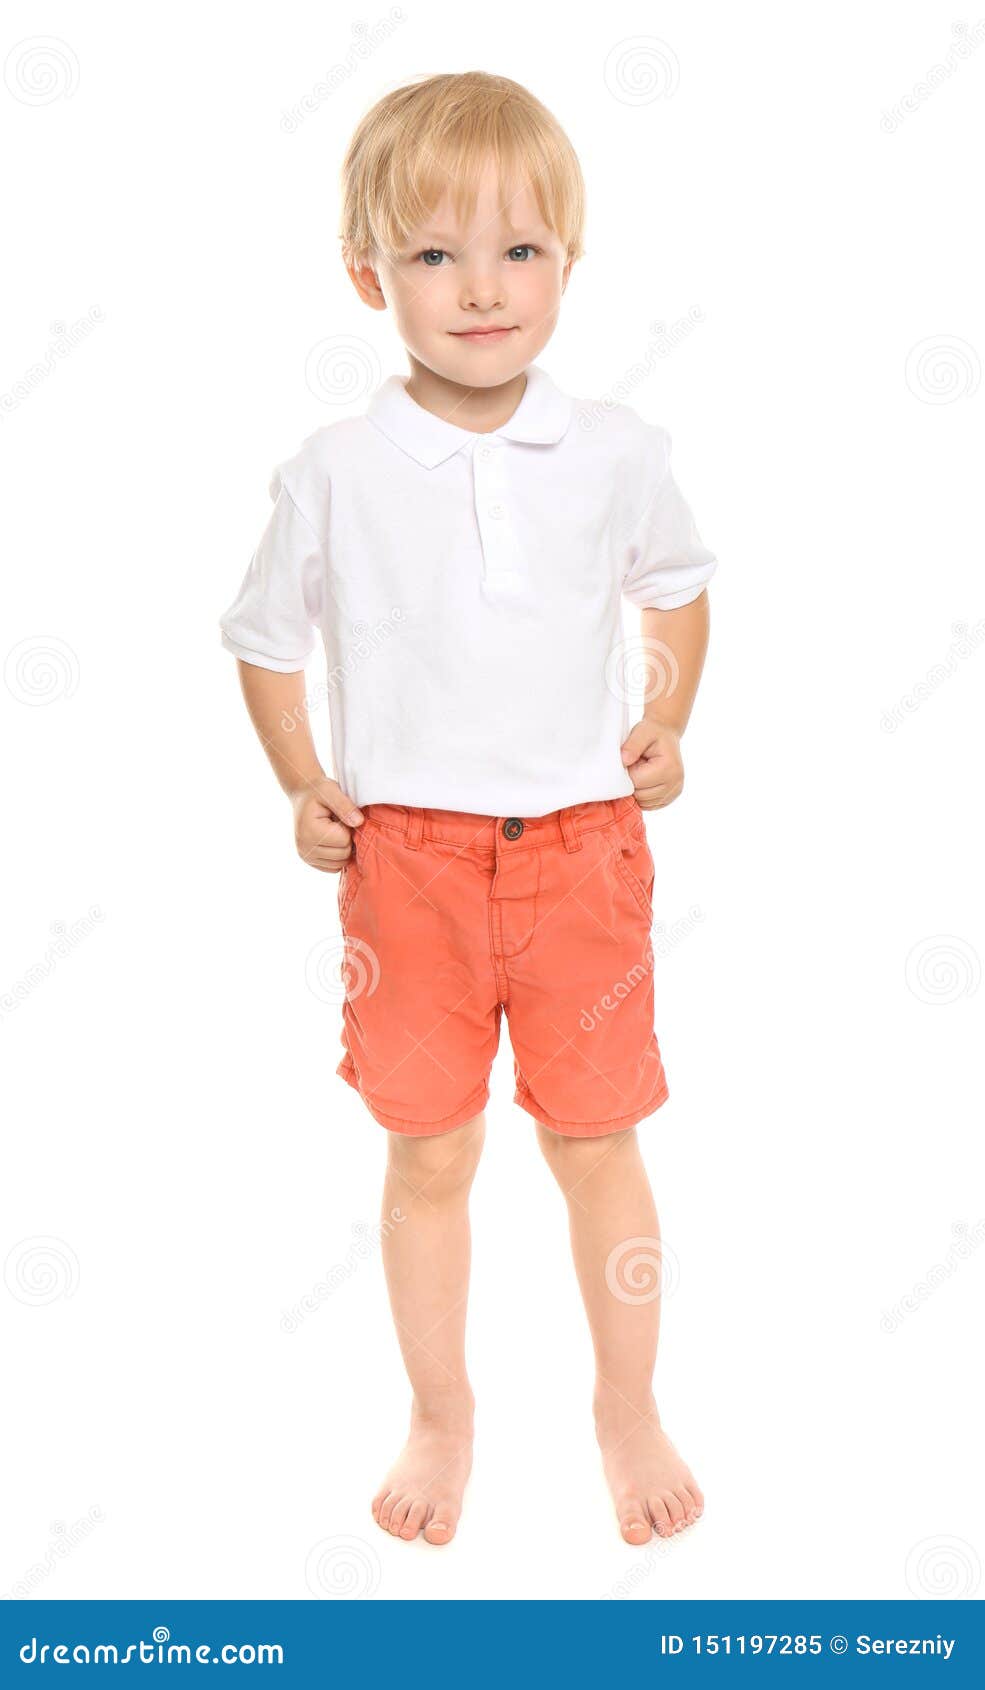 Cute Little Boy on White Background Stock Image - Image of positive ...